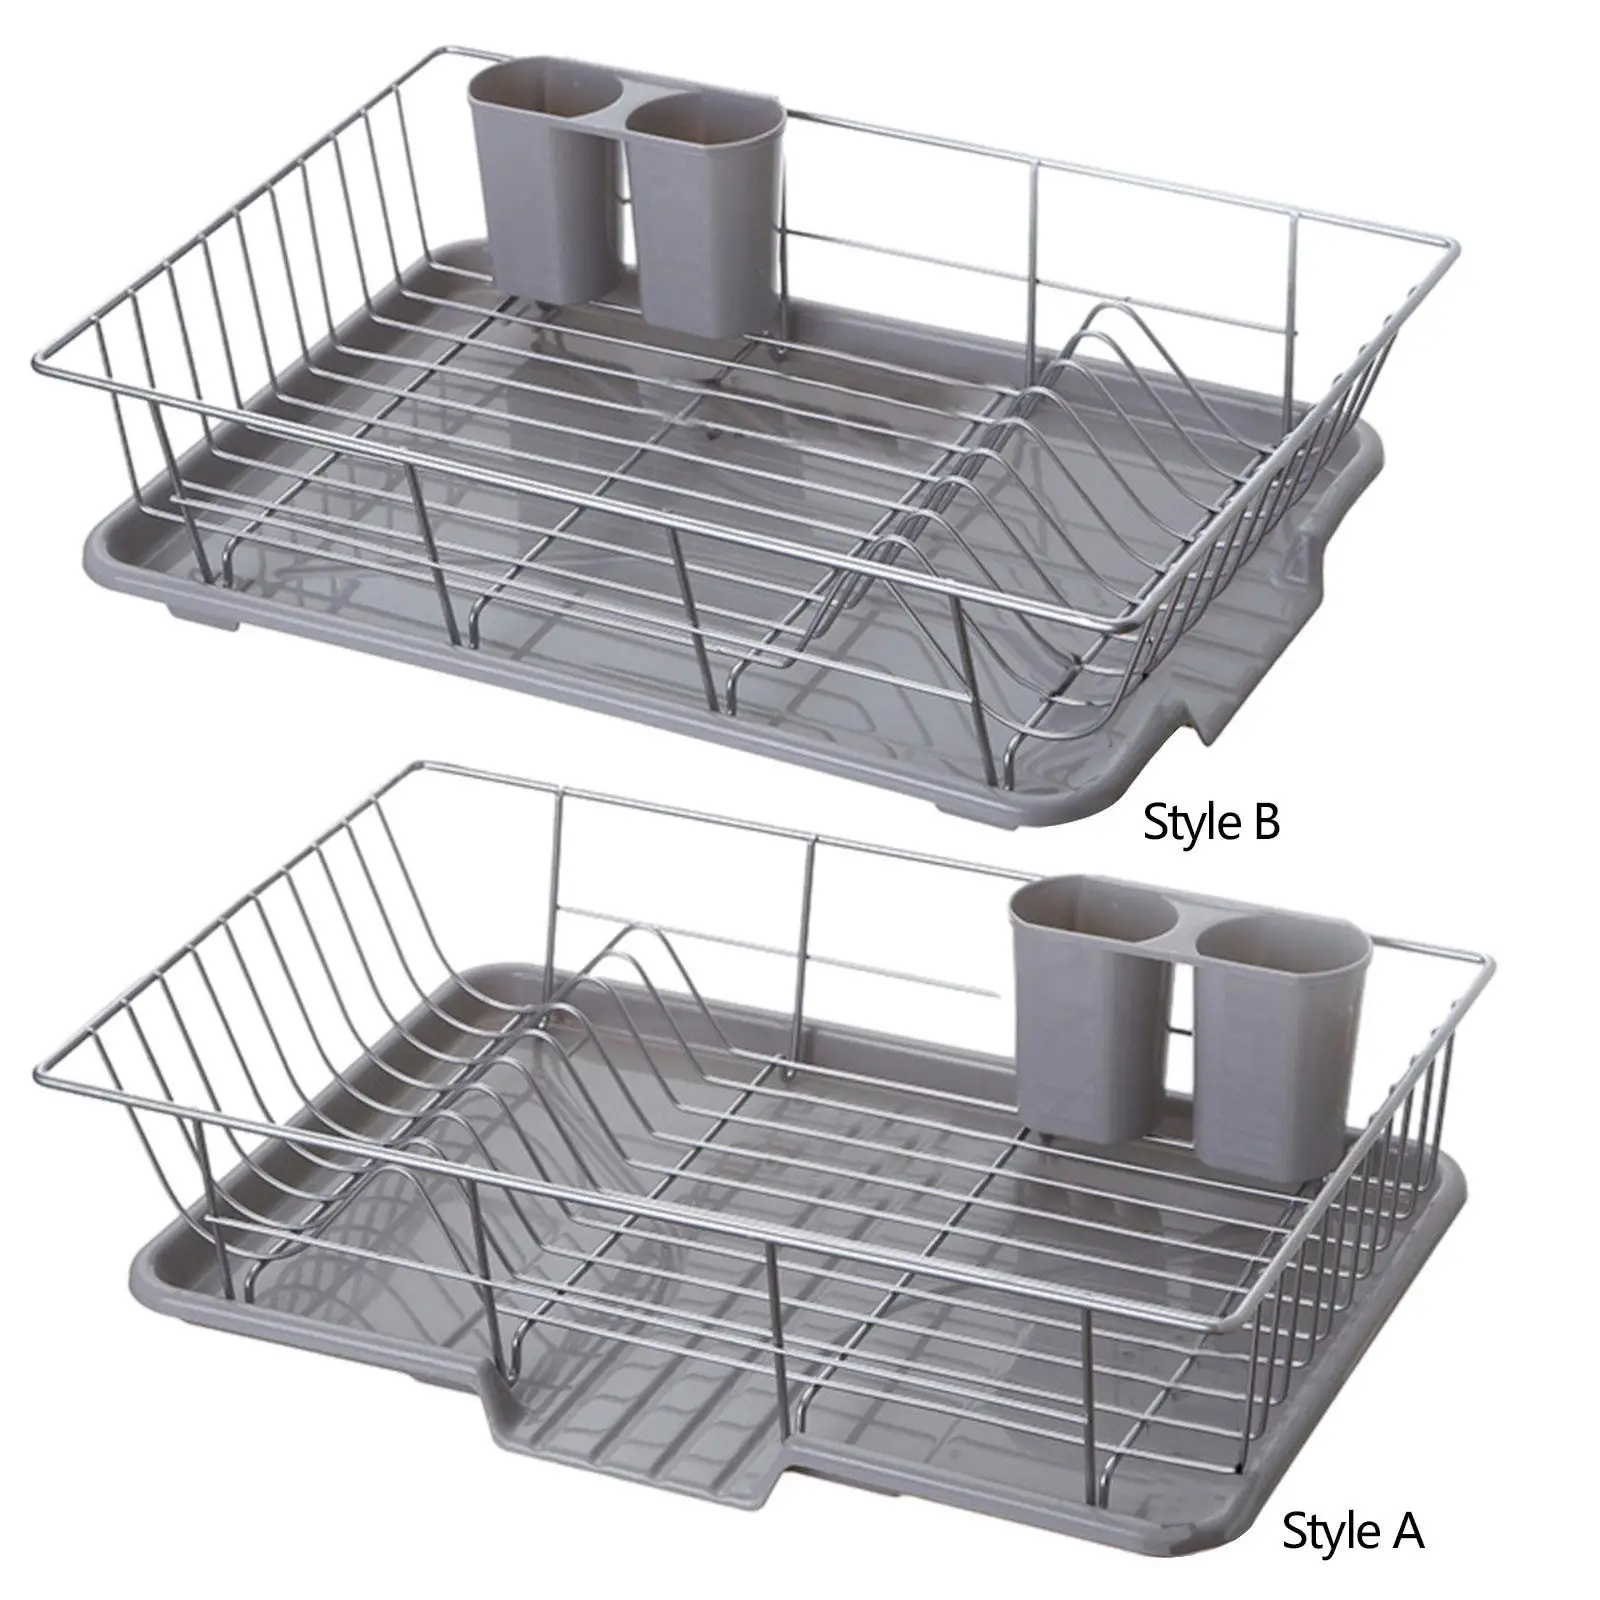 Dish Drainer Portable Utensil Holder with Drainboard Kitchen Drying Rack Dish Racks for Countertop Plates Kitchen Forks Bathroom